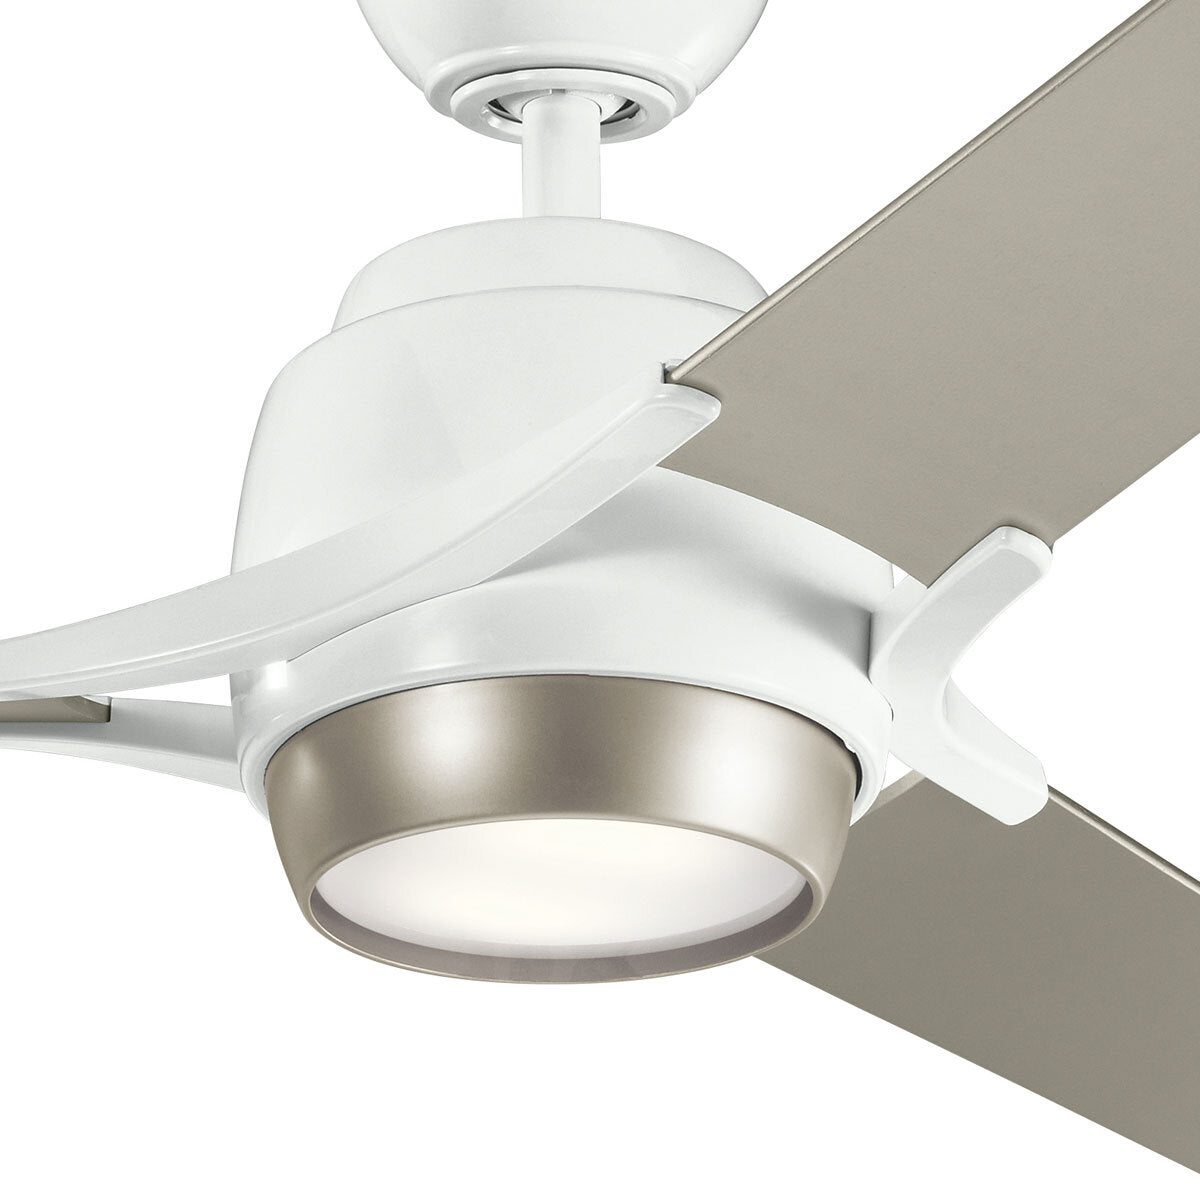 Kichler Zeus 3 Blade (152cm) Indoor Ceiling Fan with AC Motor and Remote Control